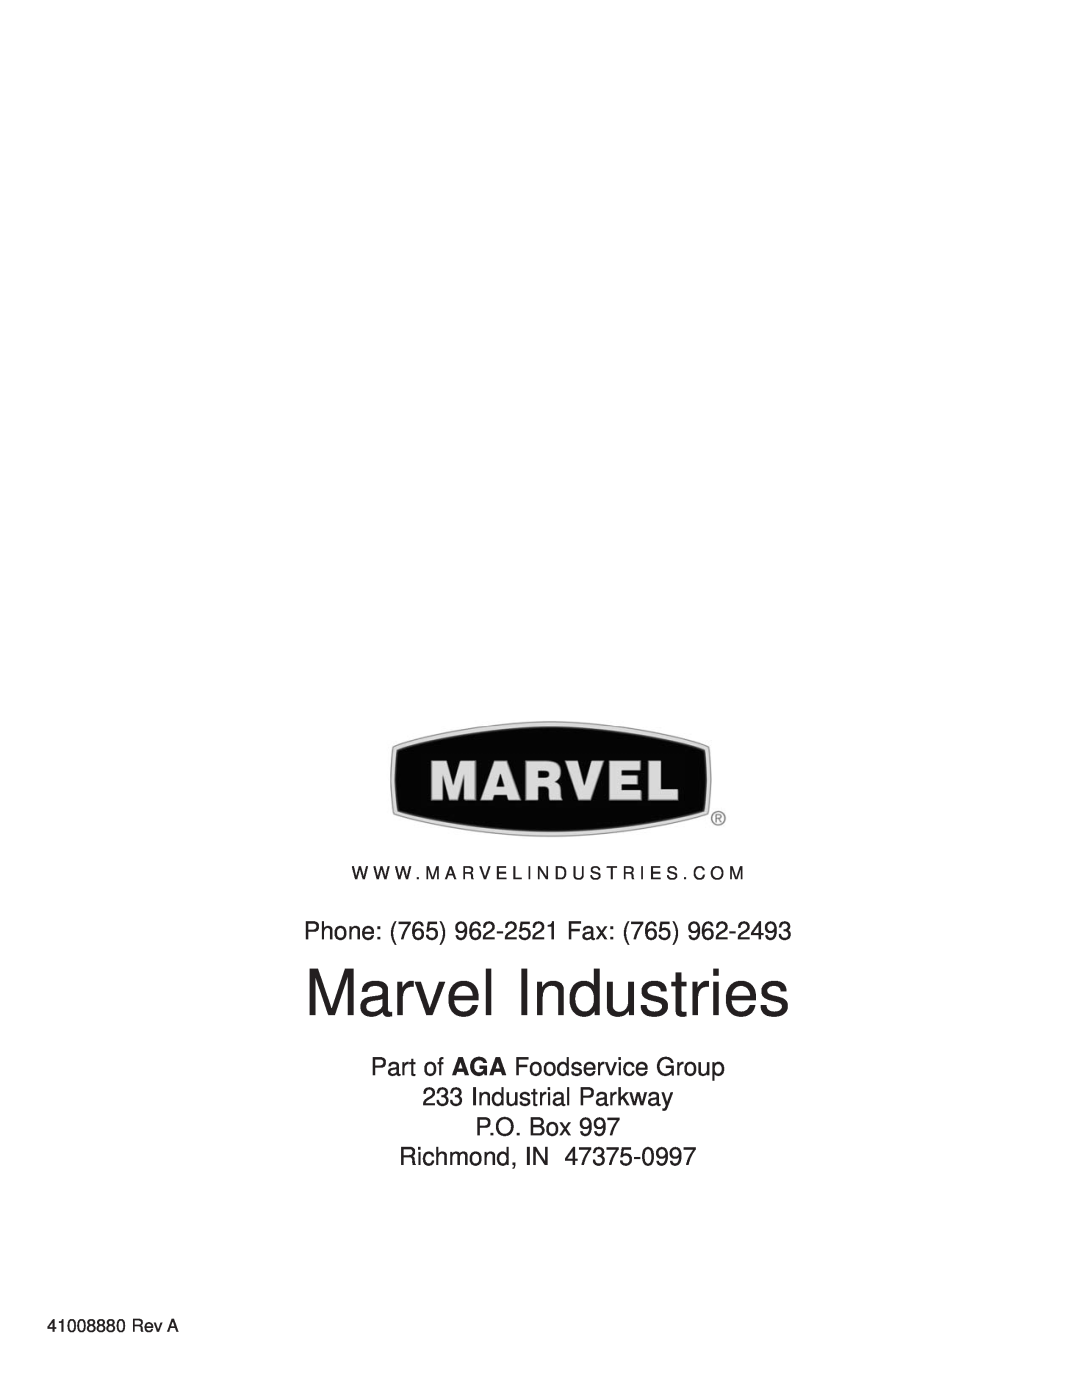 Marvel Industries Refrigerated Wine Chiller manual Marvel Industries, Phone 765 962-2521Fax, Part of AGA Foodservice Group 